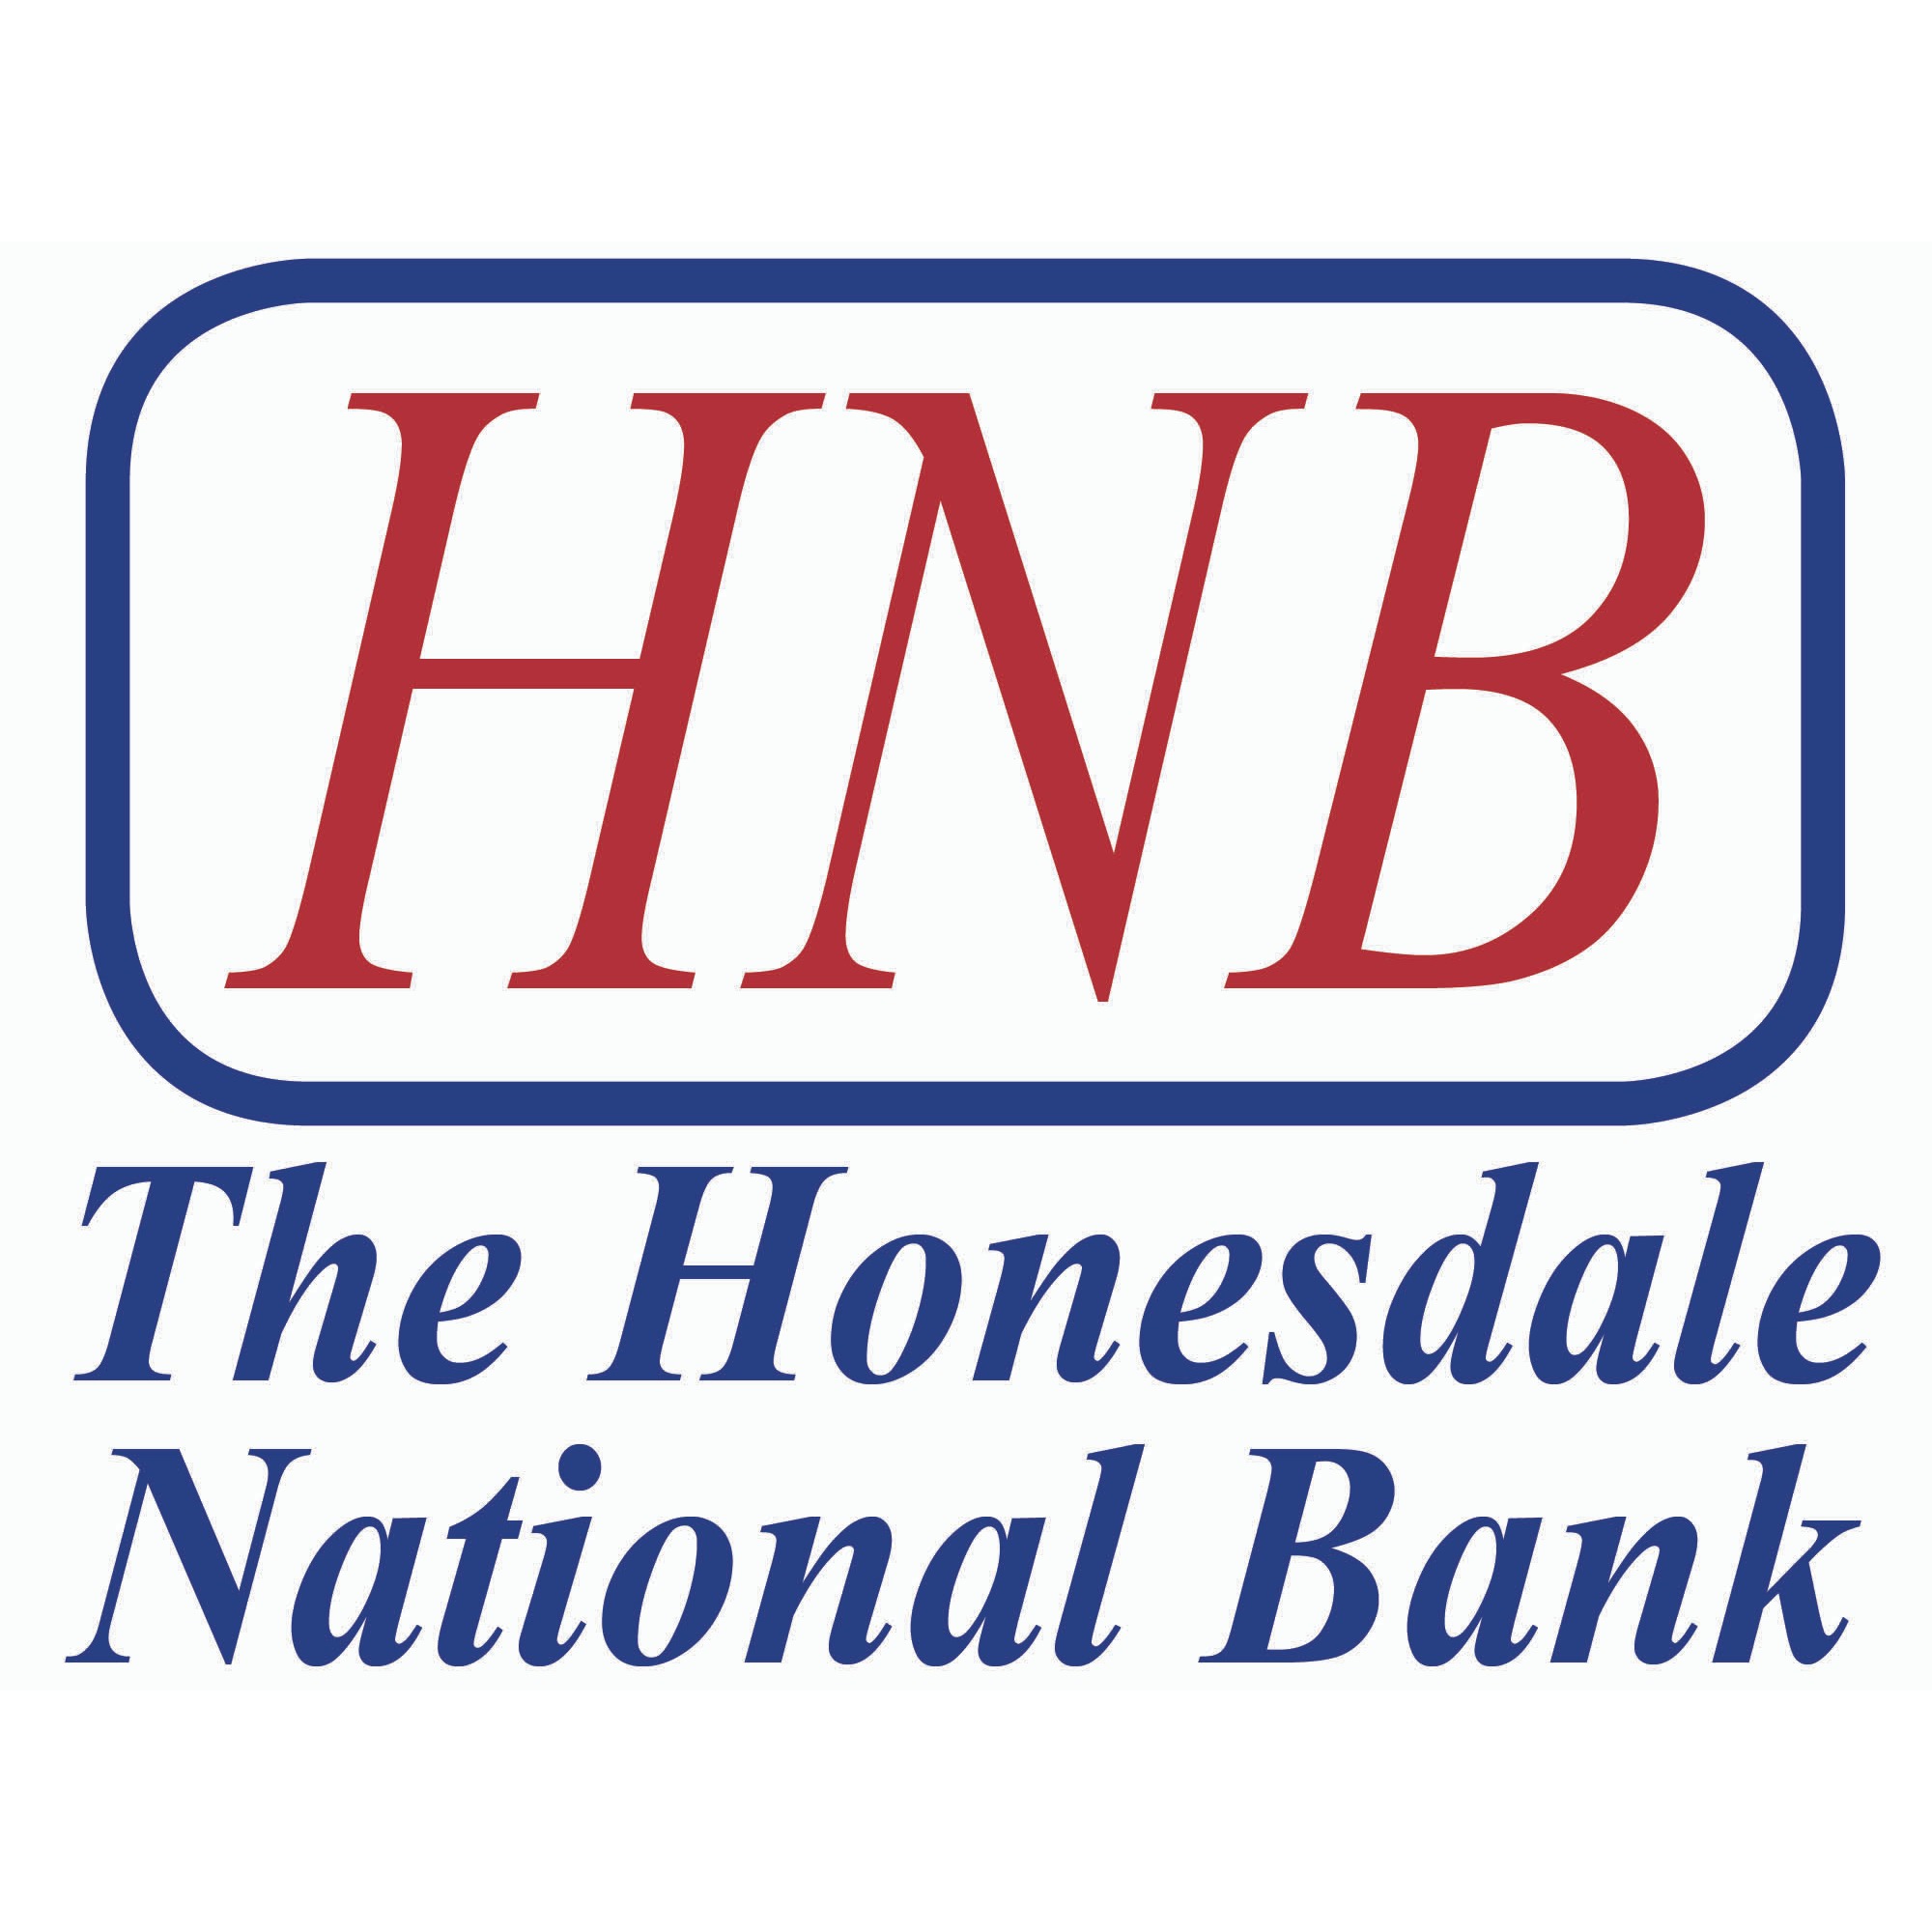 The Honesdale National Bank - Kingston, PA 18704 - (570)283-6900 | ShowMeLocal.com